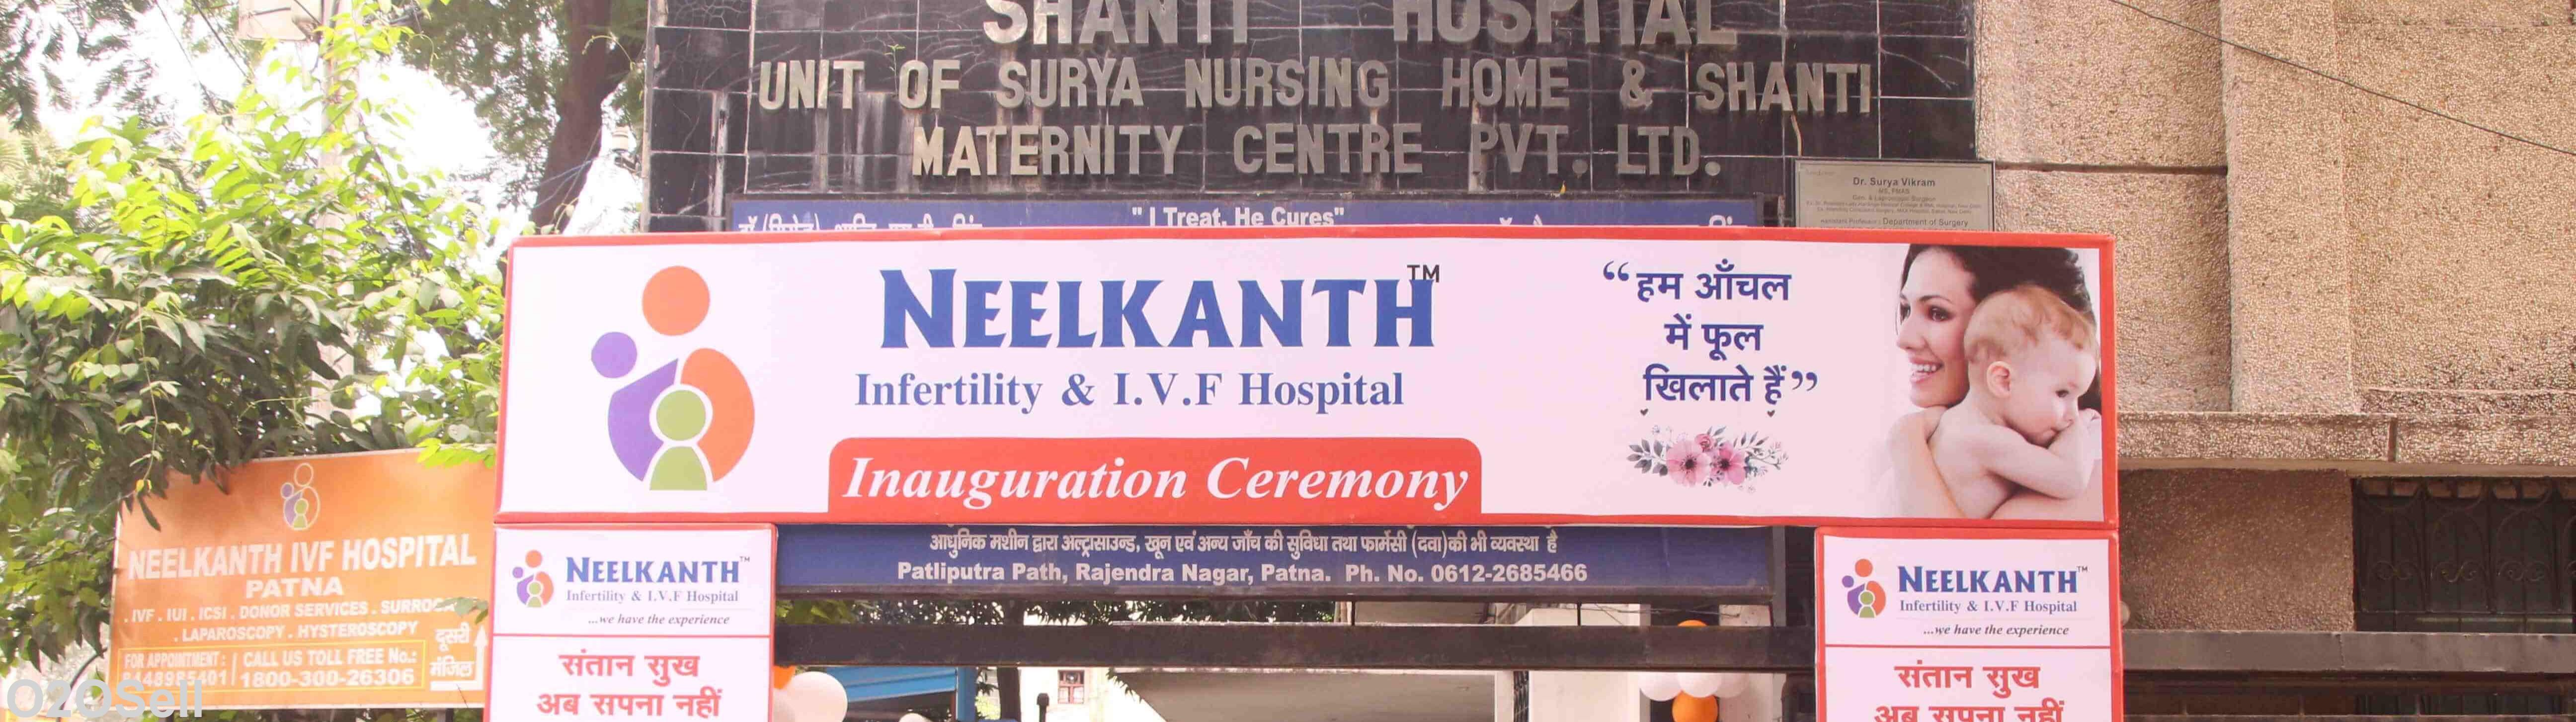 Neelkanth Infertility & IVF Centre: Best IVF Centre in Patna - Cover Image